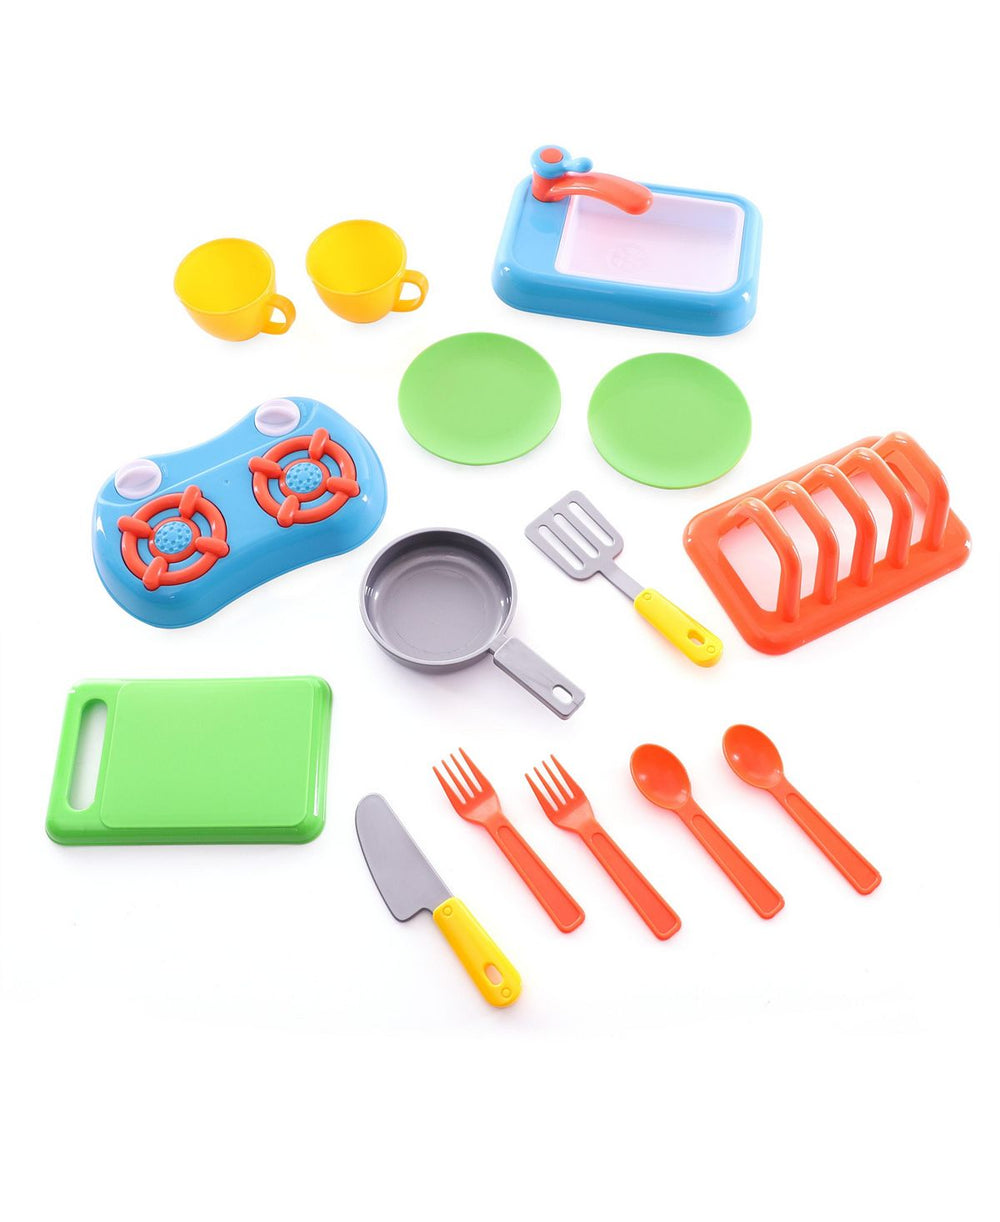 Toys R Us Complete Kitchen Playset for Kids - Colorful Pretend Cooking Set